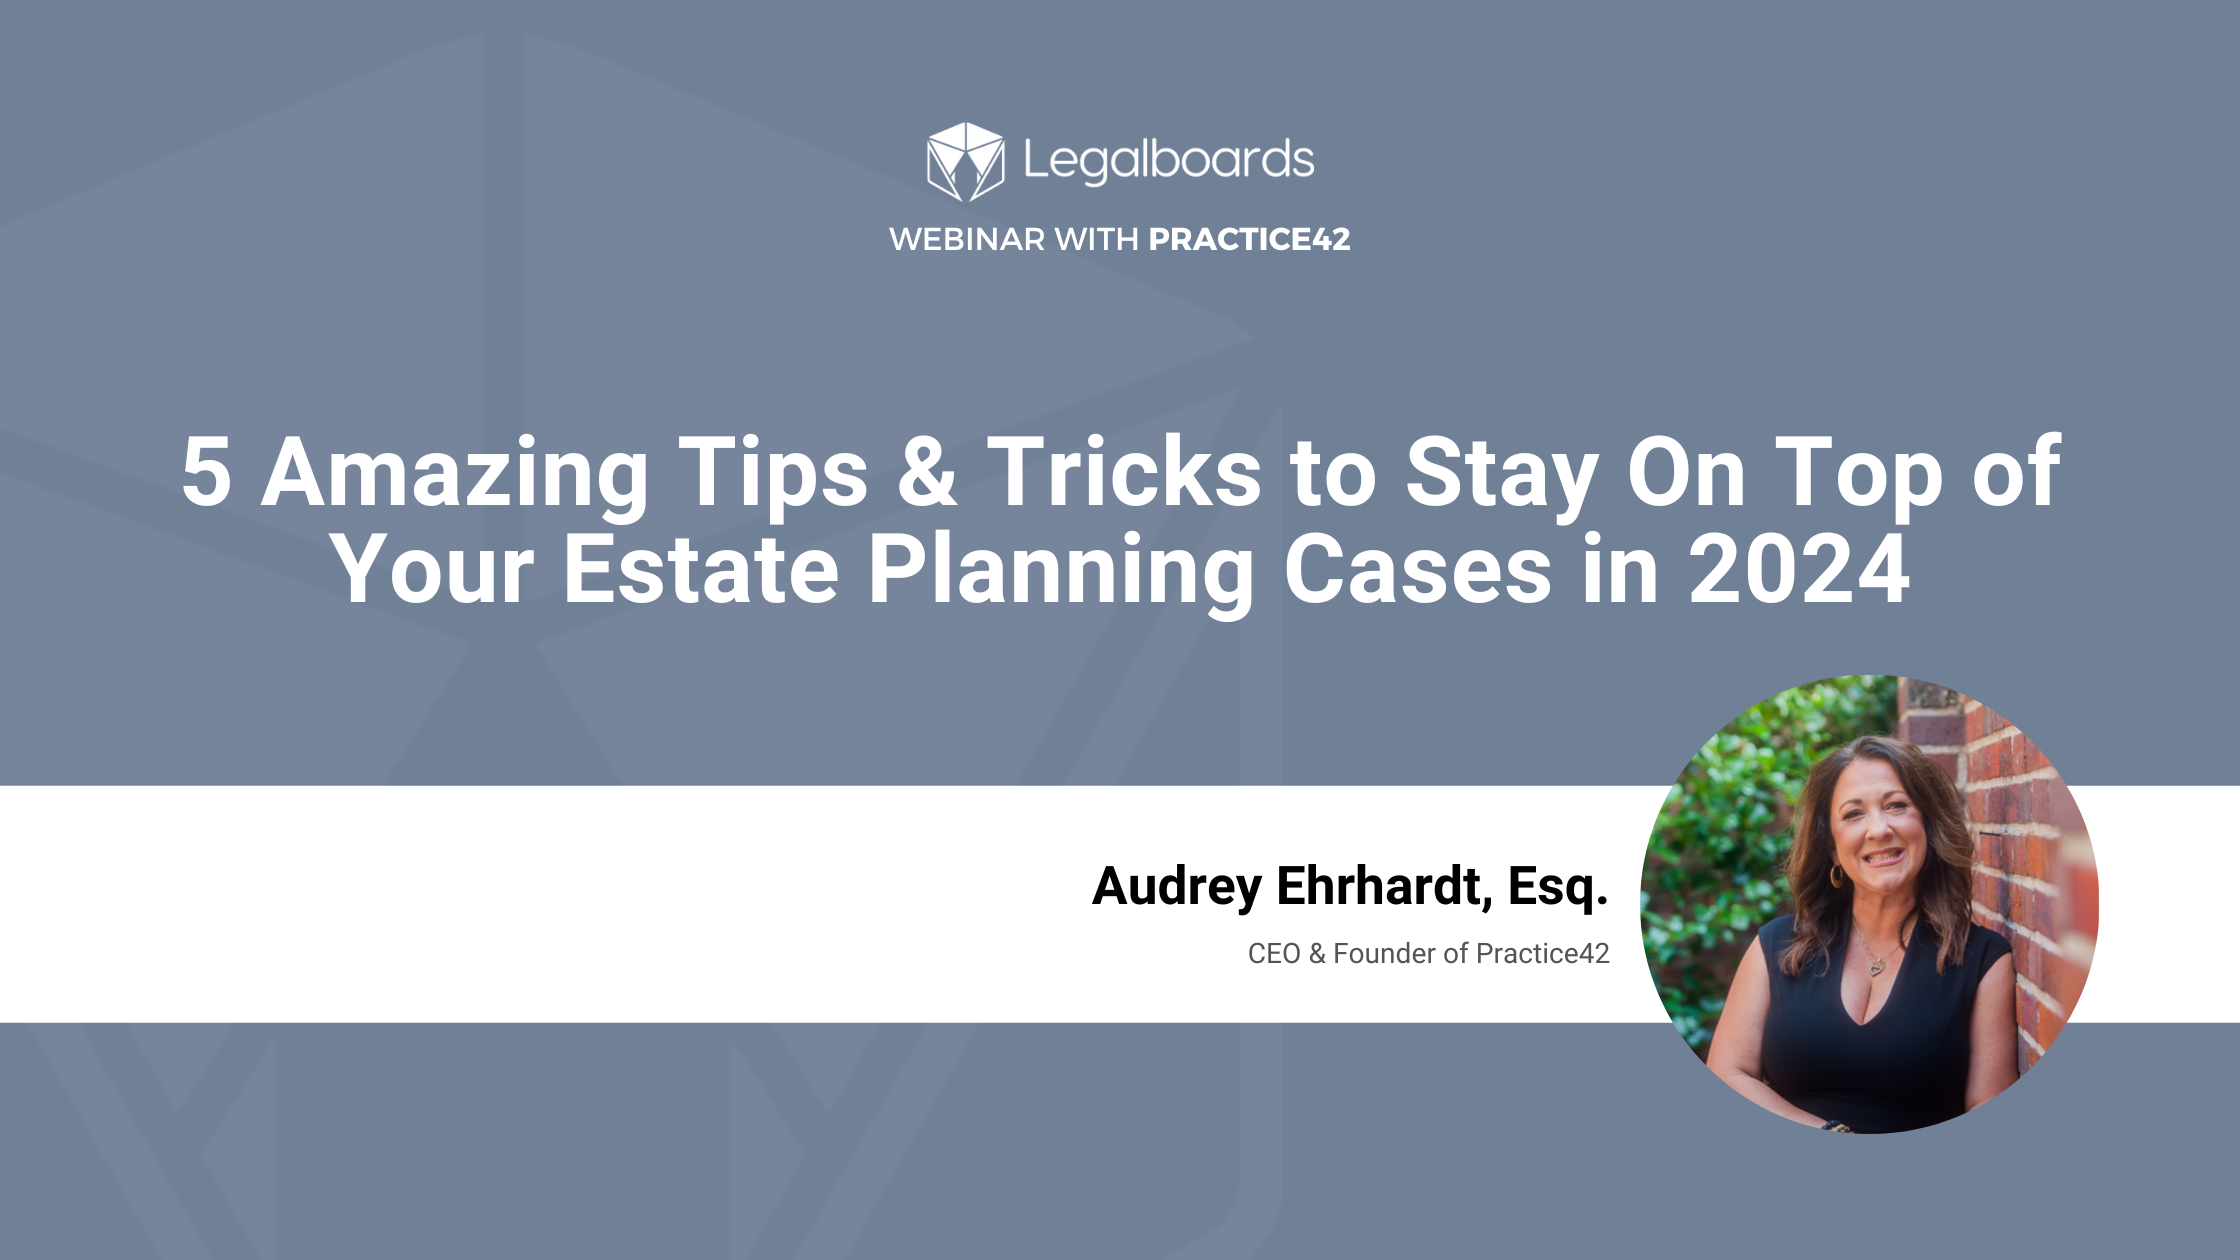 5 Tips & Tricks to Stay on Top of Your Estate Planning Cases in 2024 Webinar